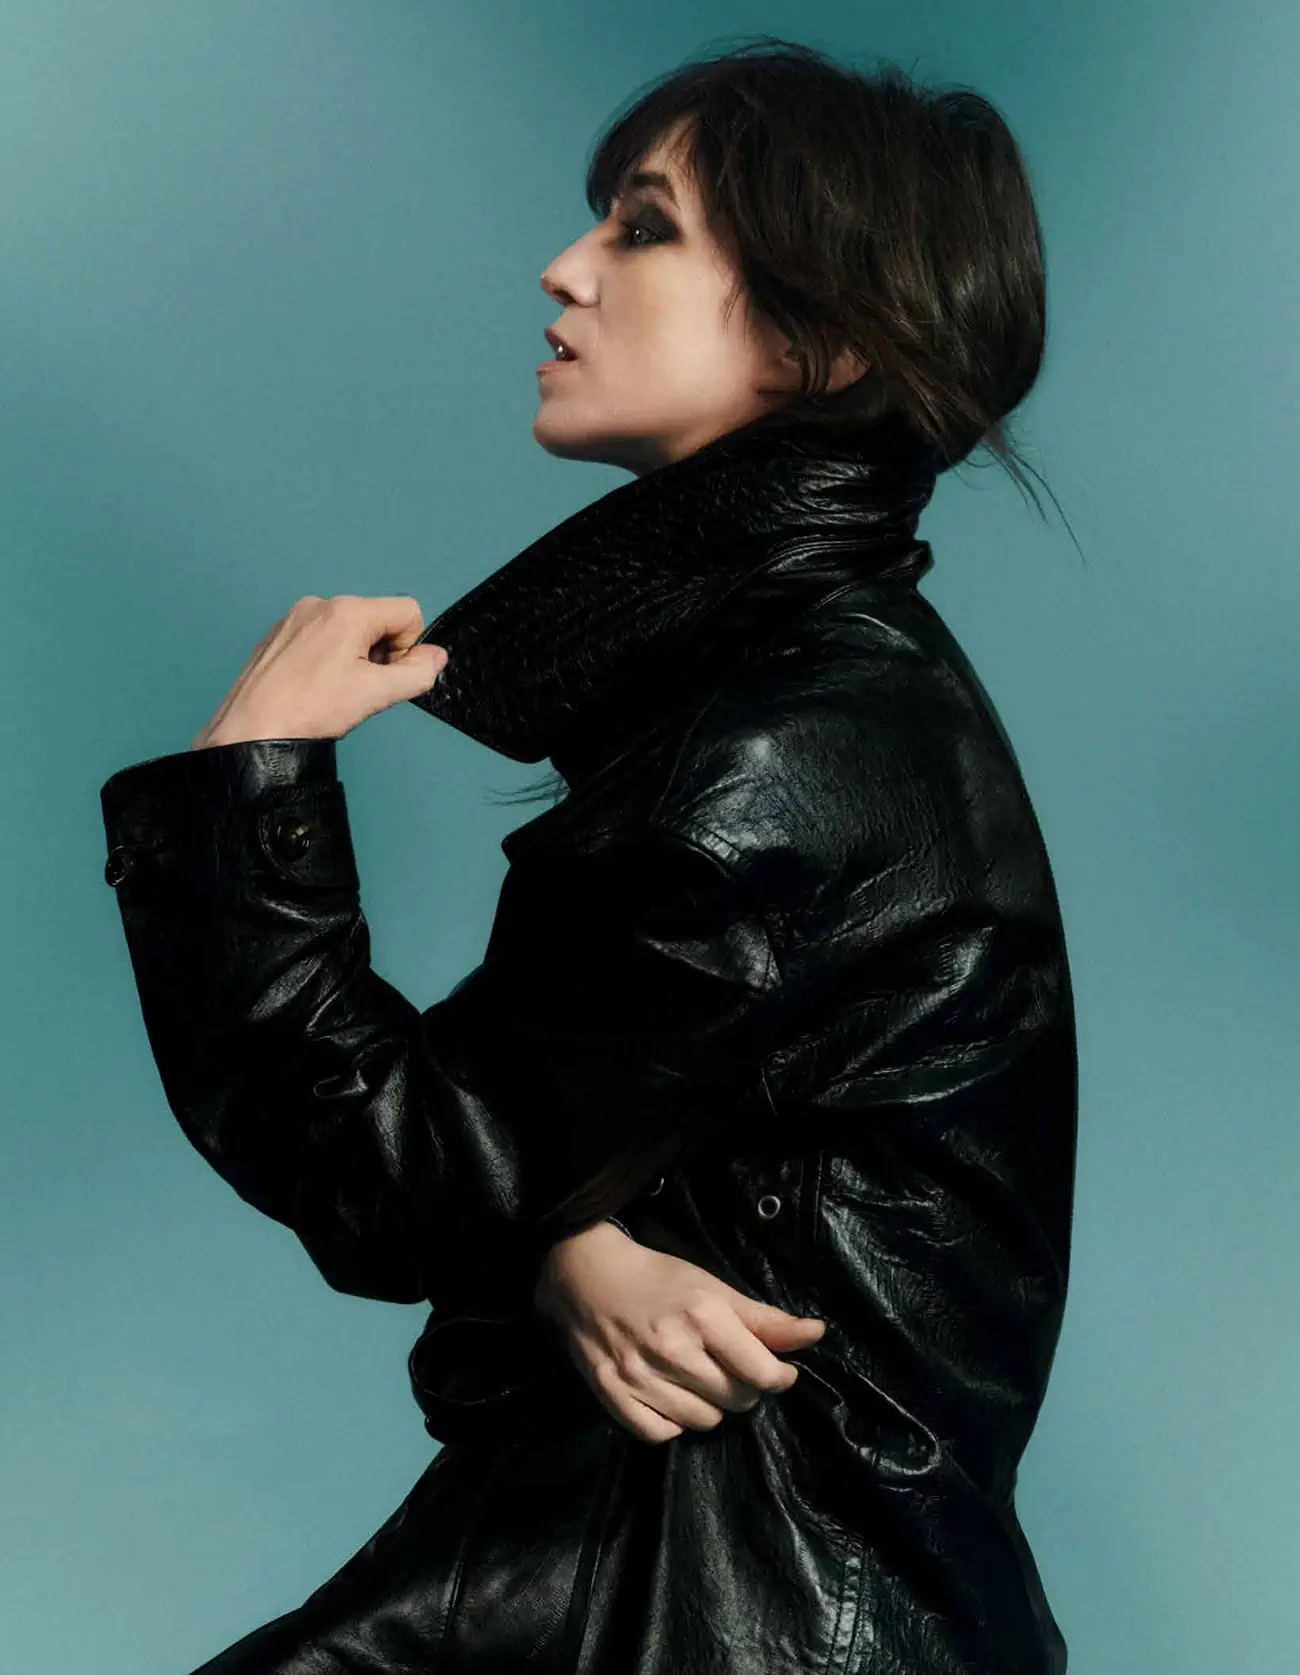 Charlotte Gainsbourg covers Madame Figaro April 21st, 2023 by Studio L’Étiquette